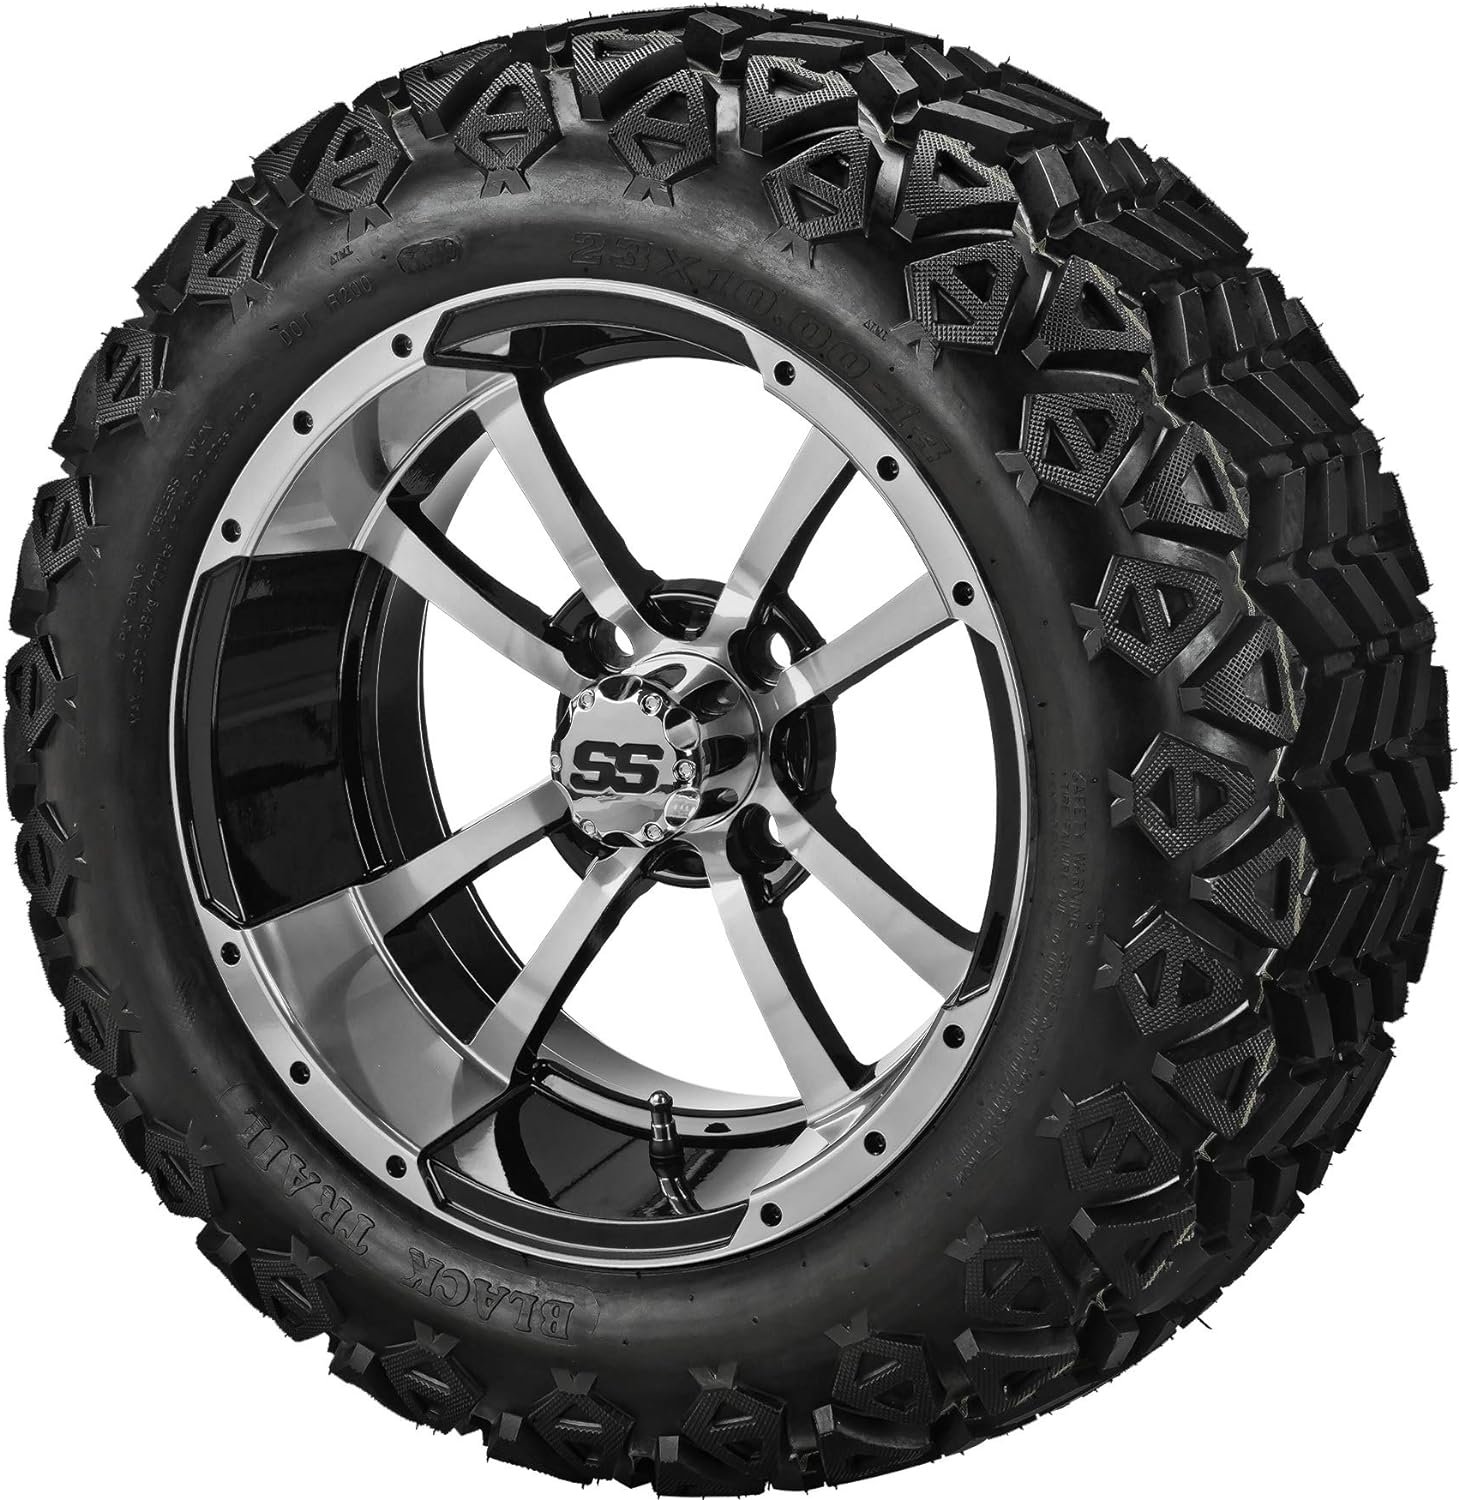 RM Cart - 14 Maltese Cross Black/Machined on 23x10-14 Black Trail Tires (Set of 4), Fits Yamaha Carts, Golf Cart Tires and Wheels Combo, Can be Used on Lawn Mowers and ATVs